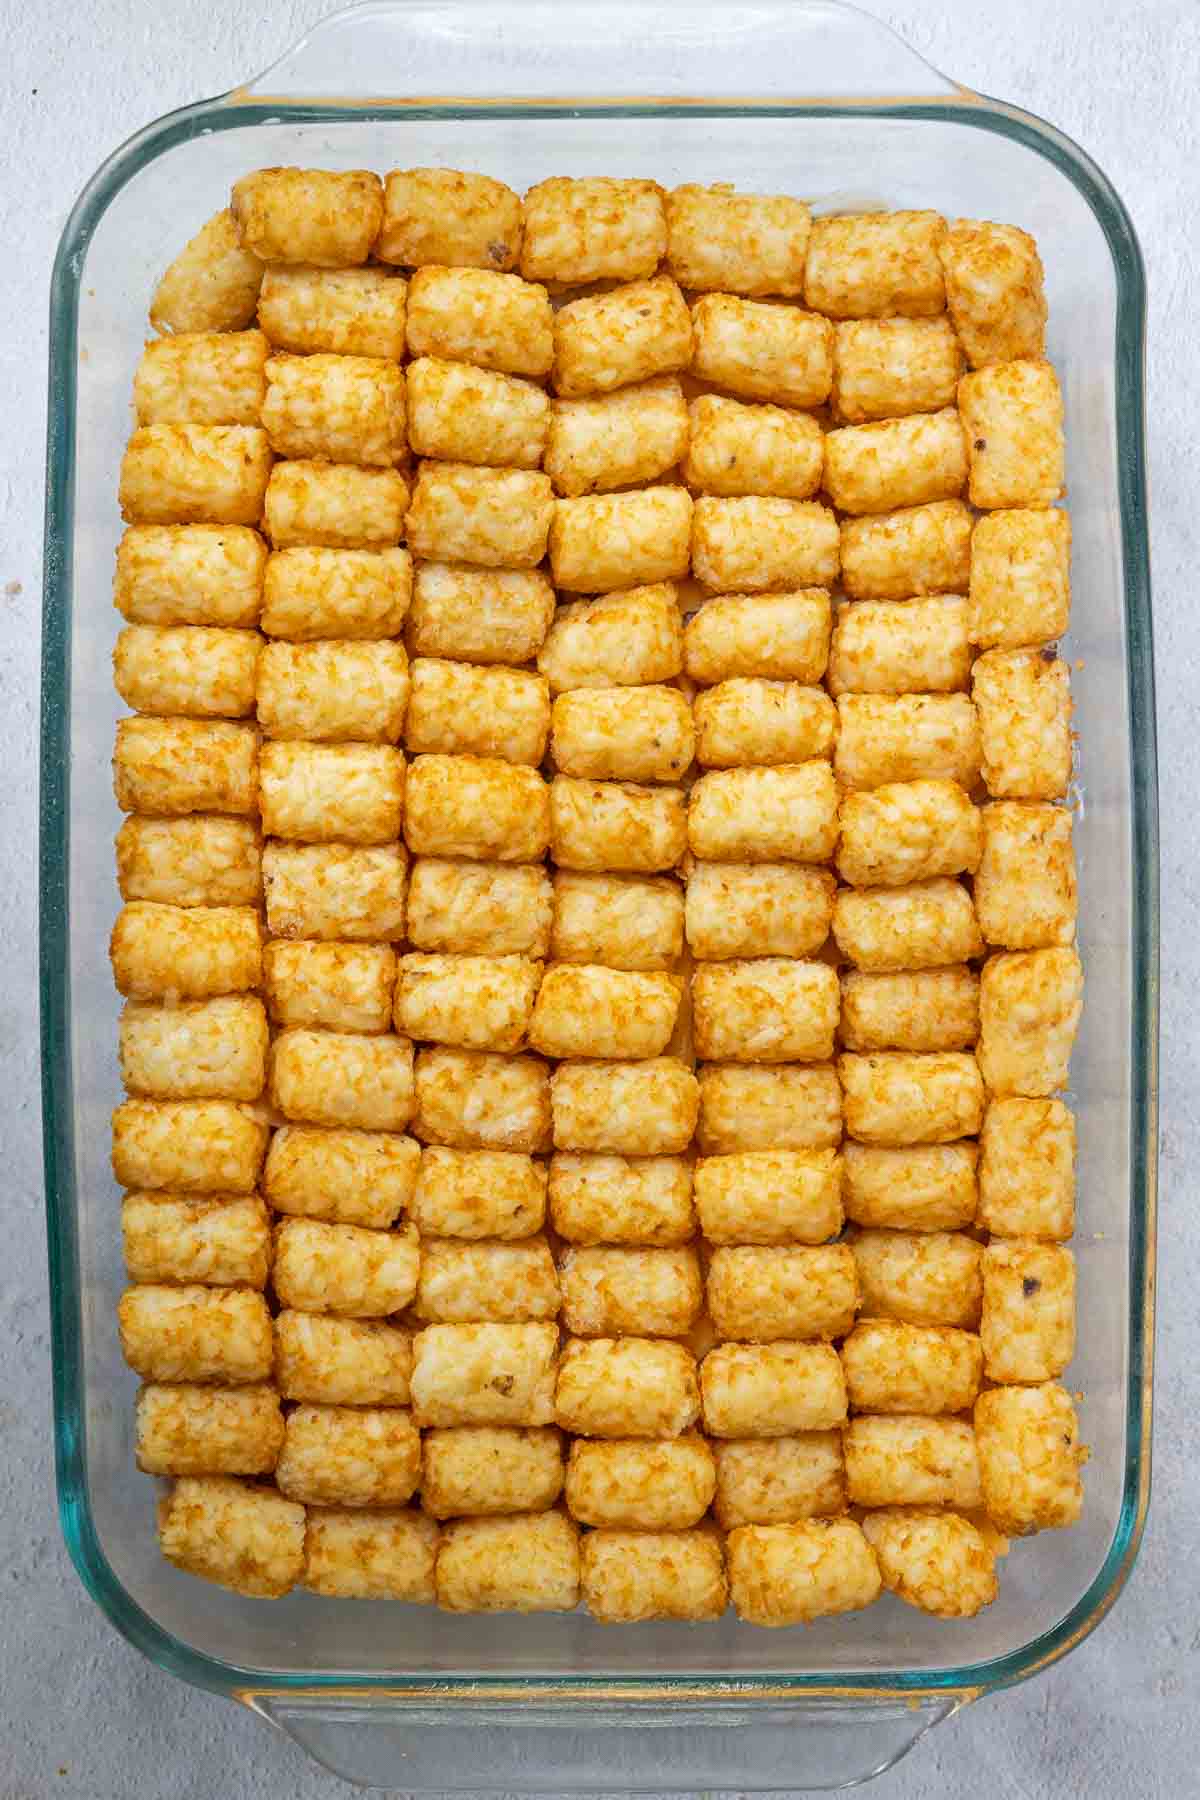 Tater tots are placed on their side in a single layer over the entire casserole dish.